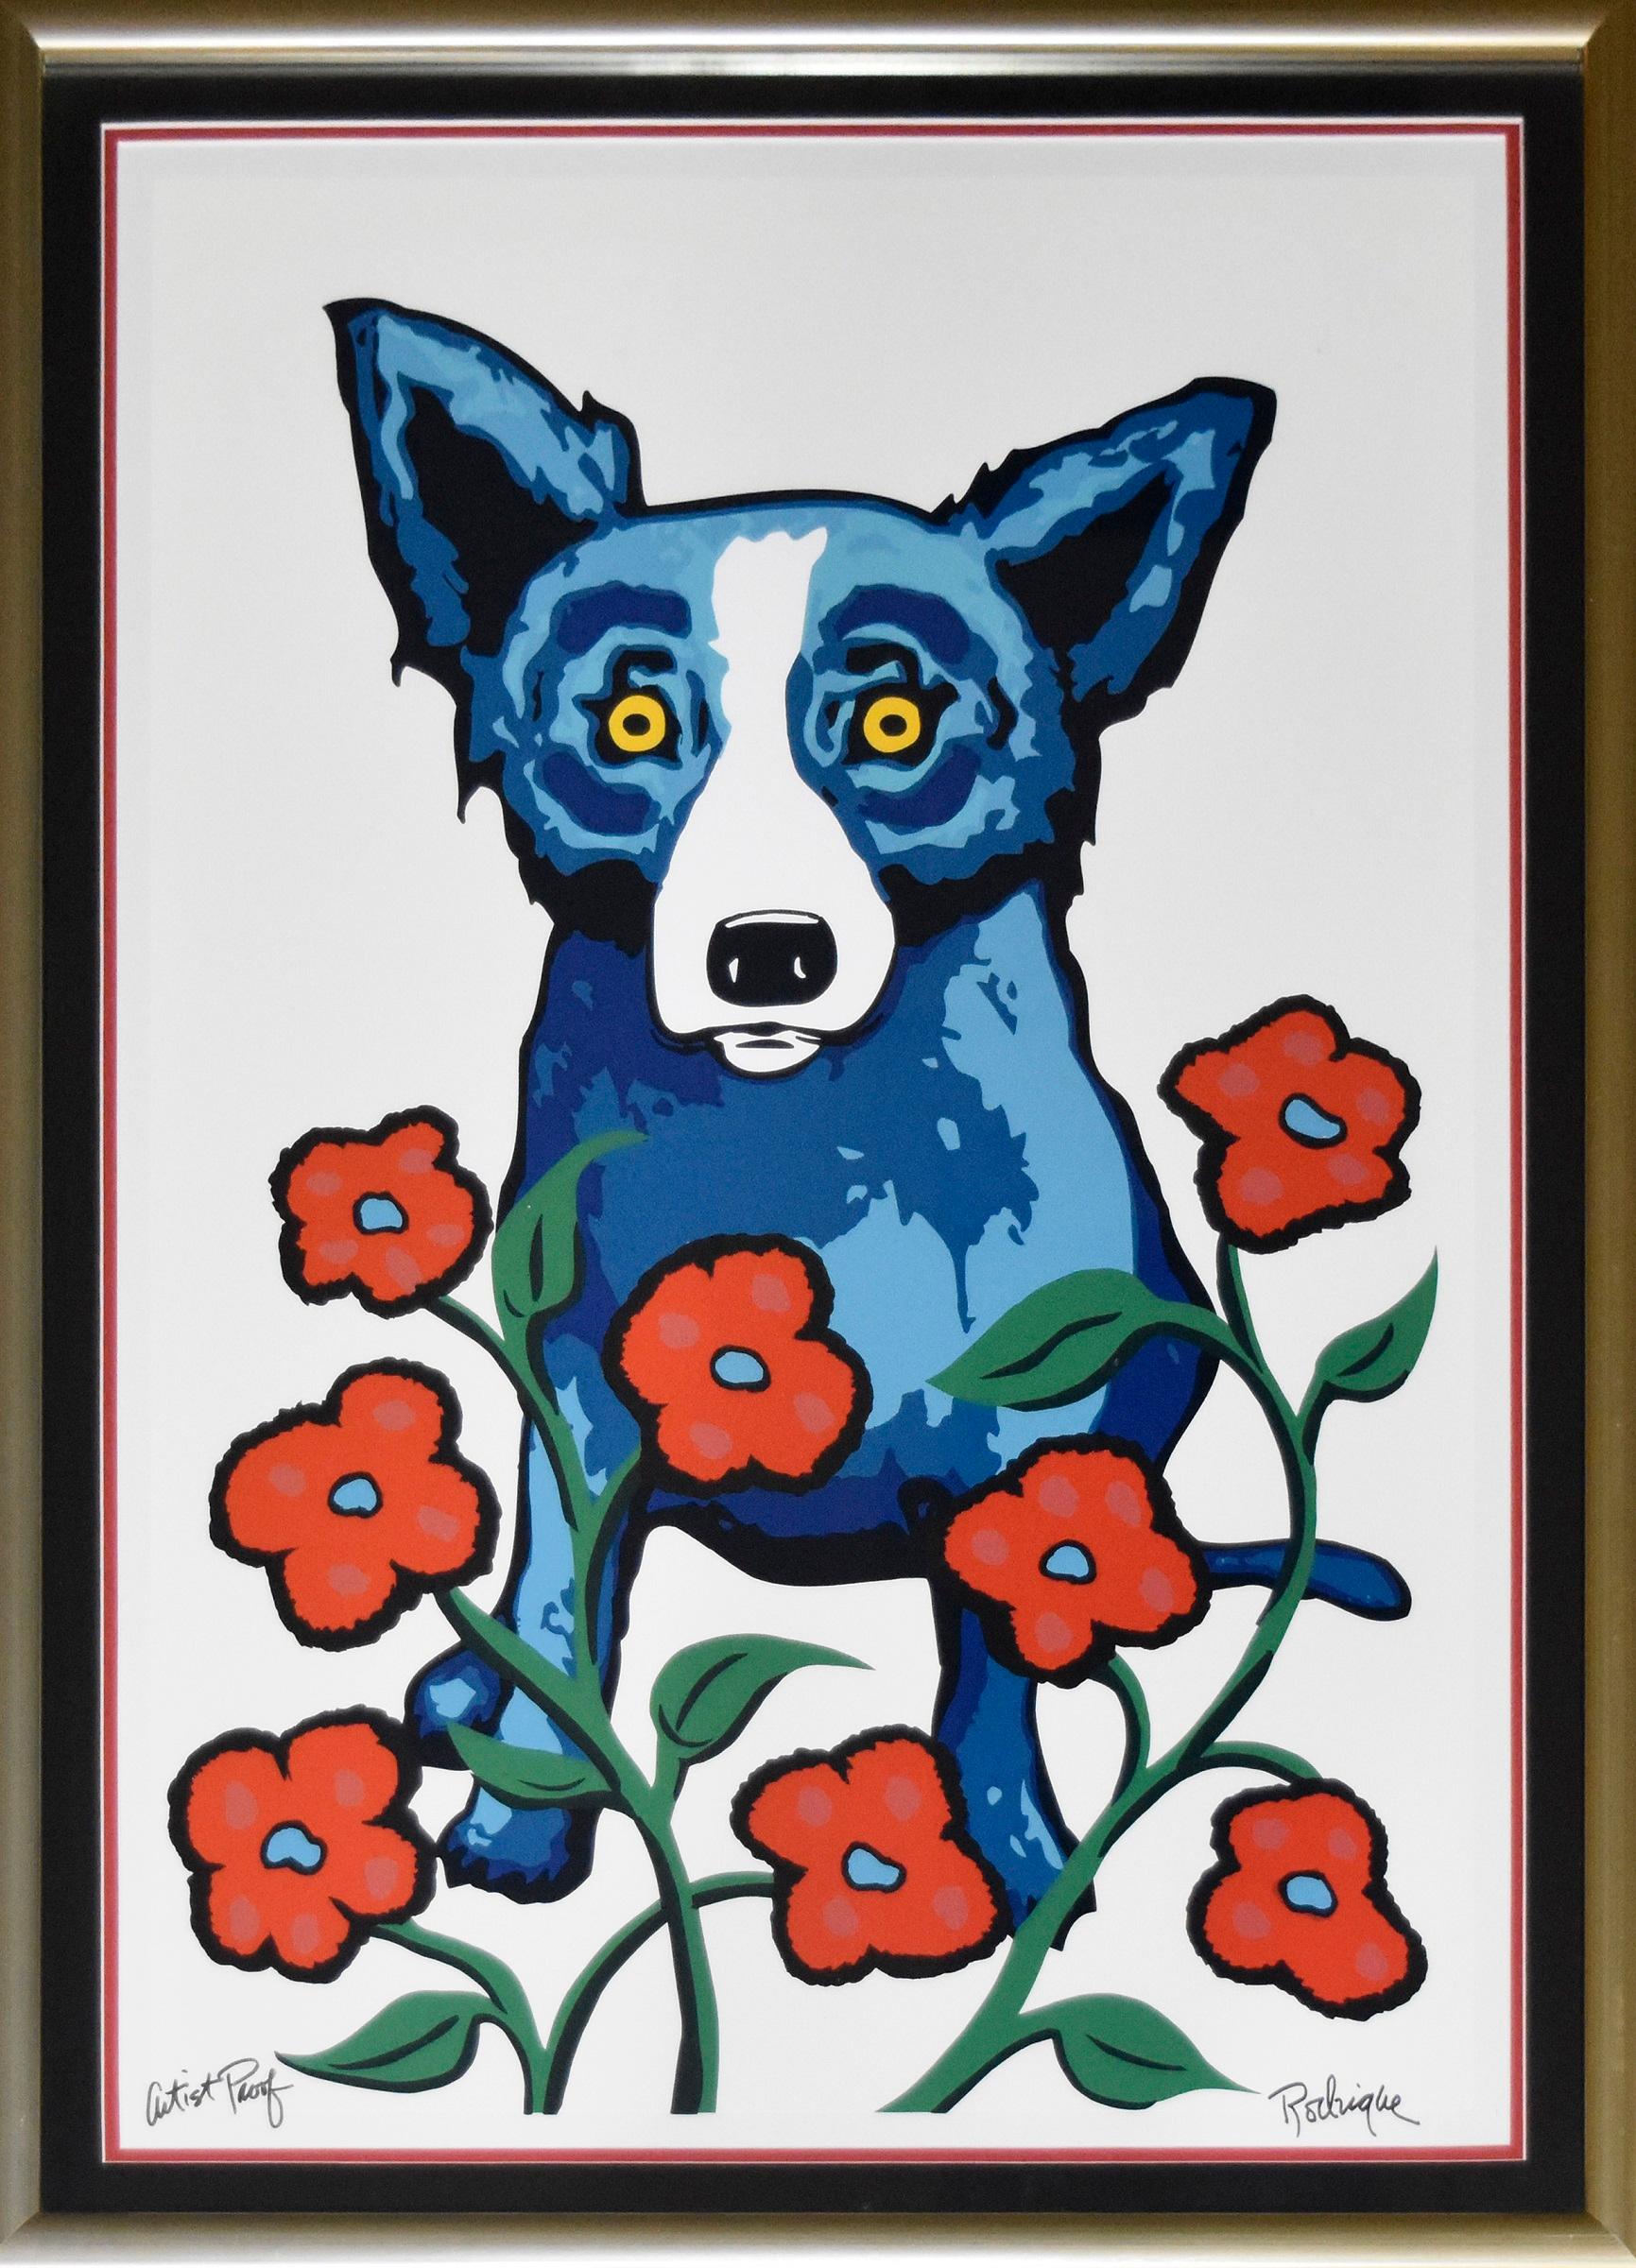 This Blue Dog work consists of a white background with 8 red flowers in the lower half of the background surrounding a single blue dog.  The dog has soulful yellow eyes.  This pop art animal original silkscreen print on paper is guaranteed authentic